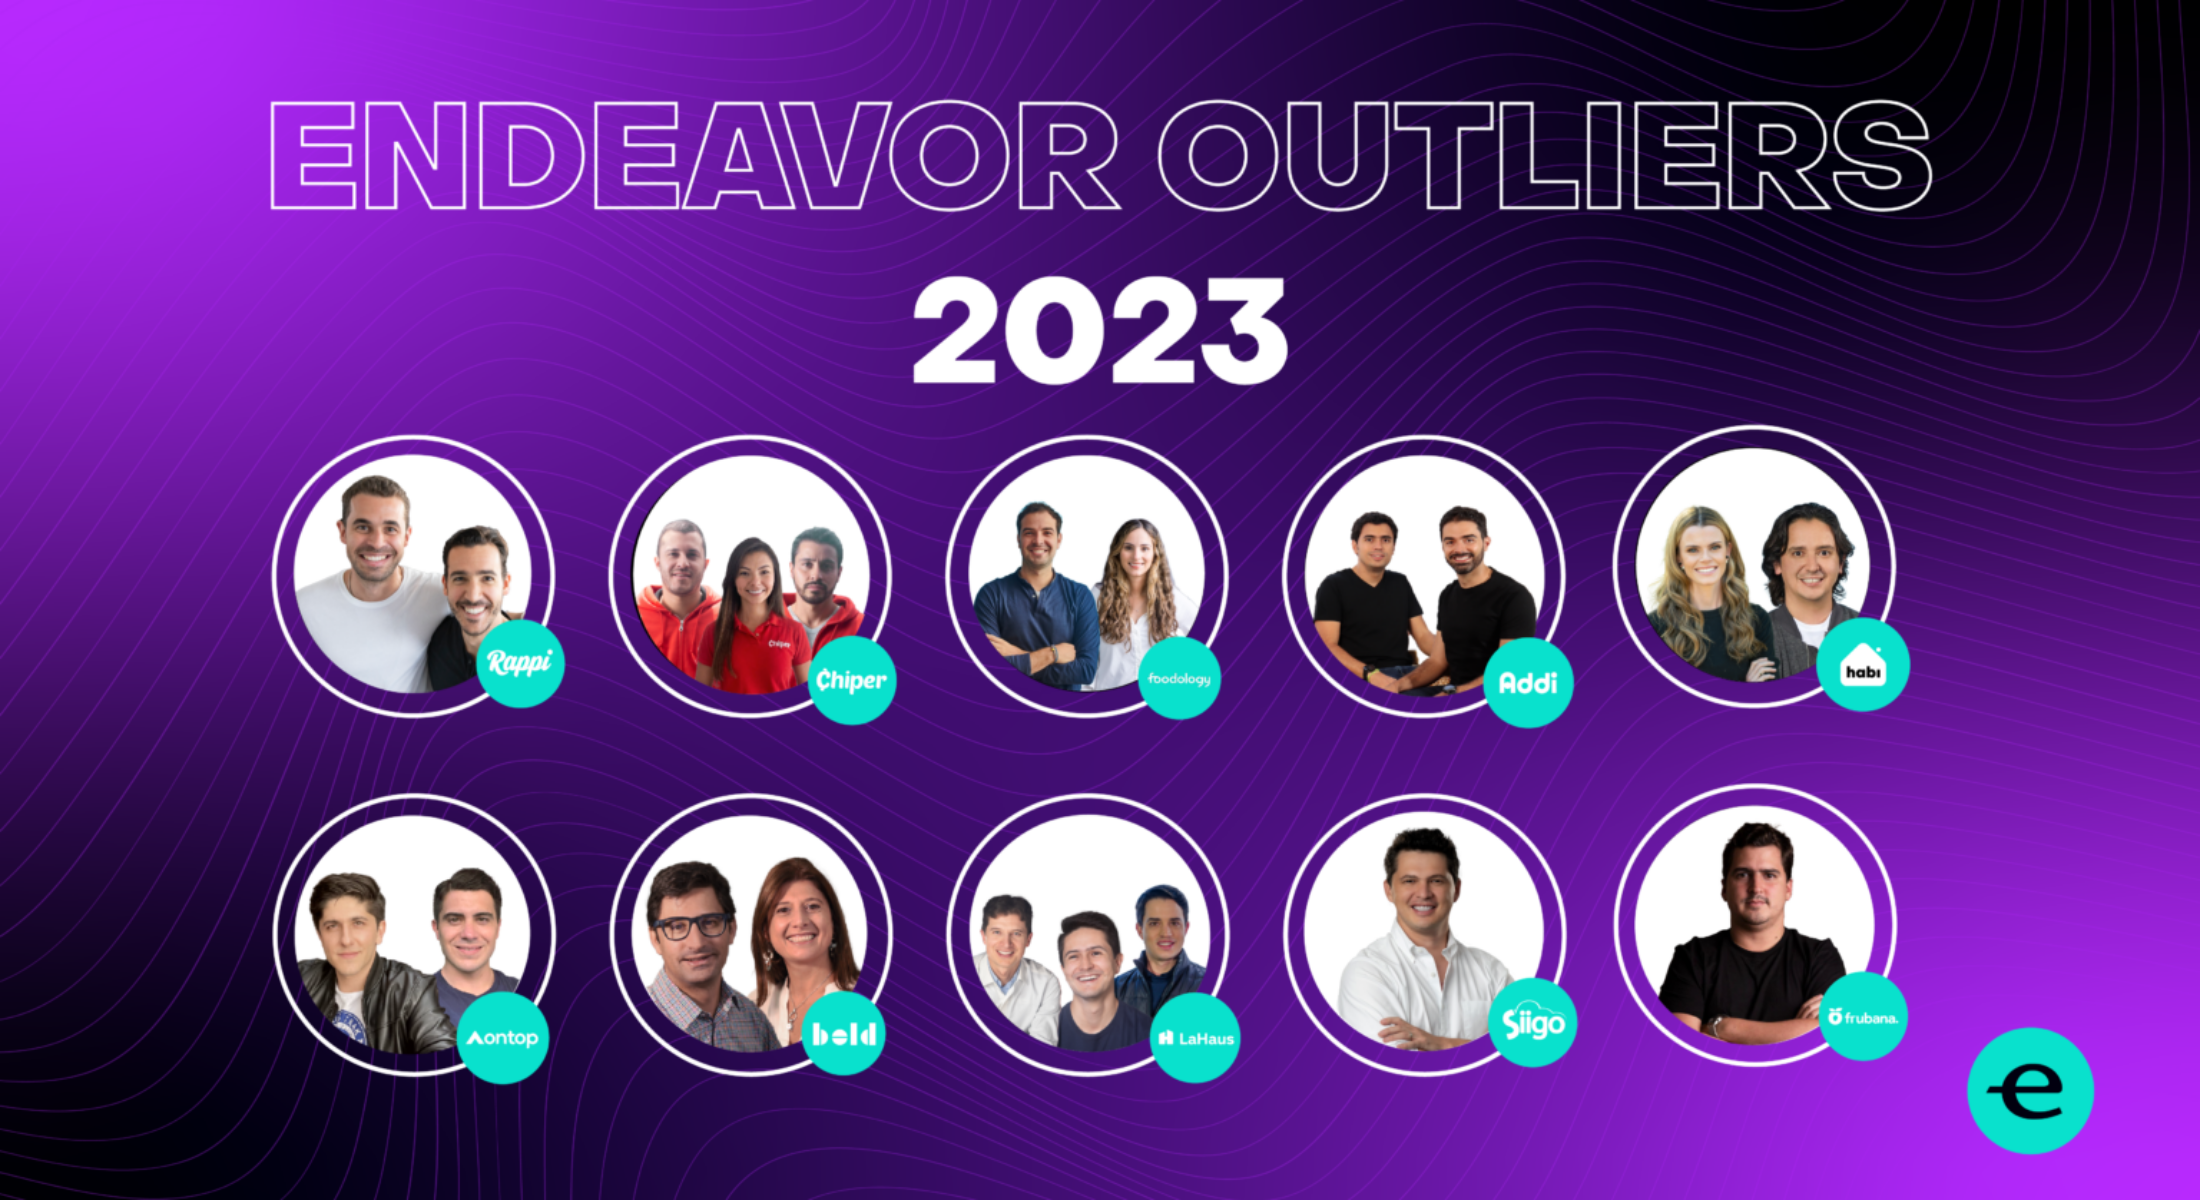 Endeavor Outliers 2023